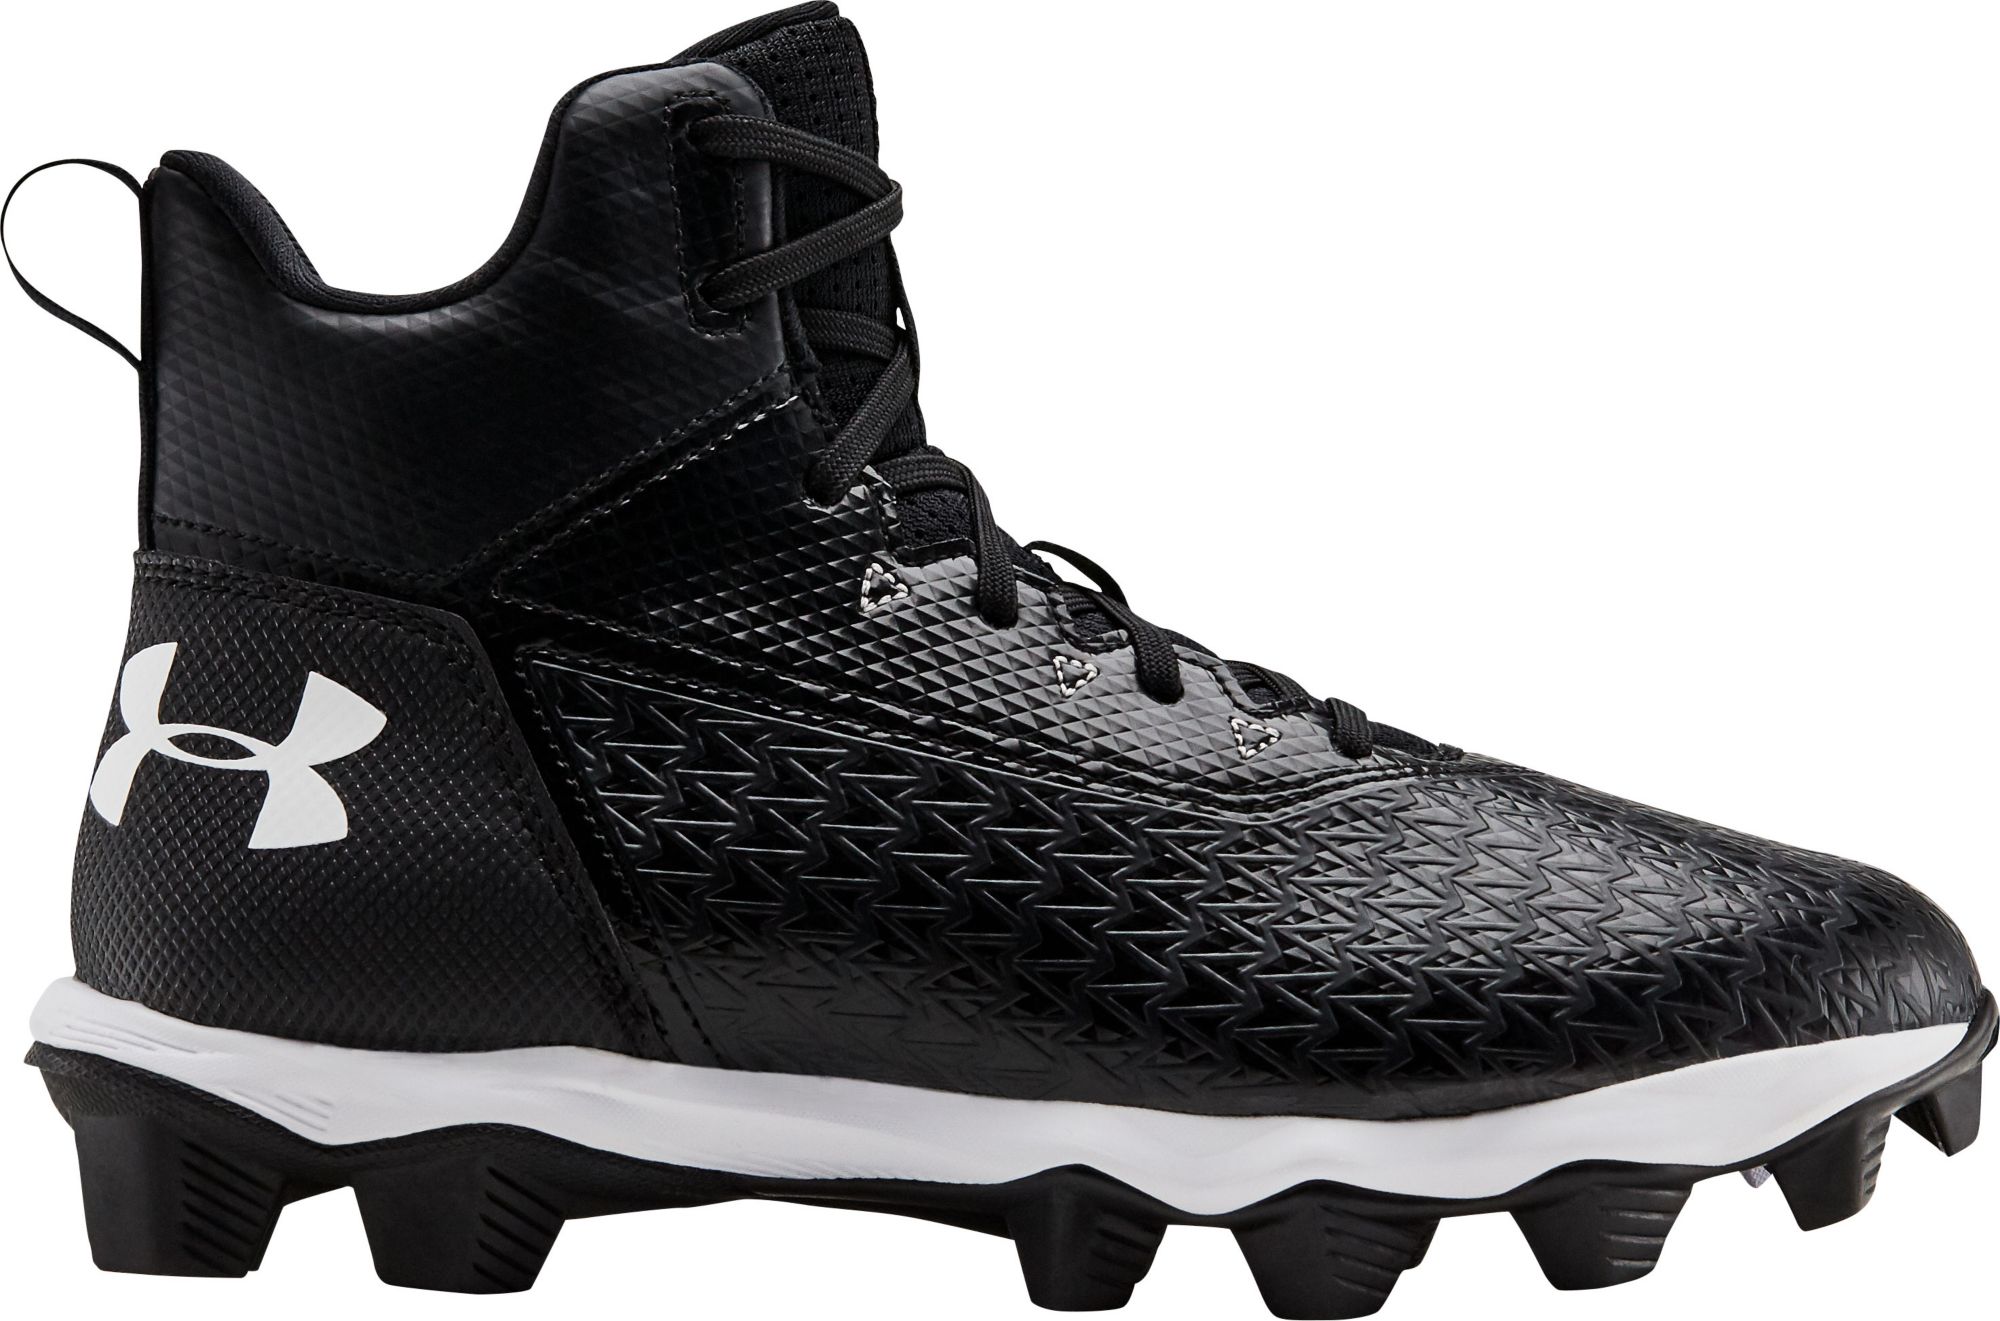 NEW Under Armour Youth Boy's Hammer Mid Football Cleats WIDE Blk/Wht #302 1G tz 